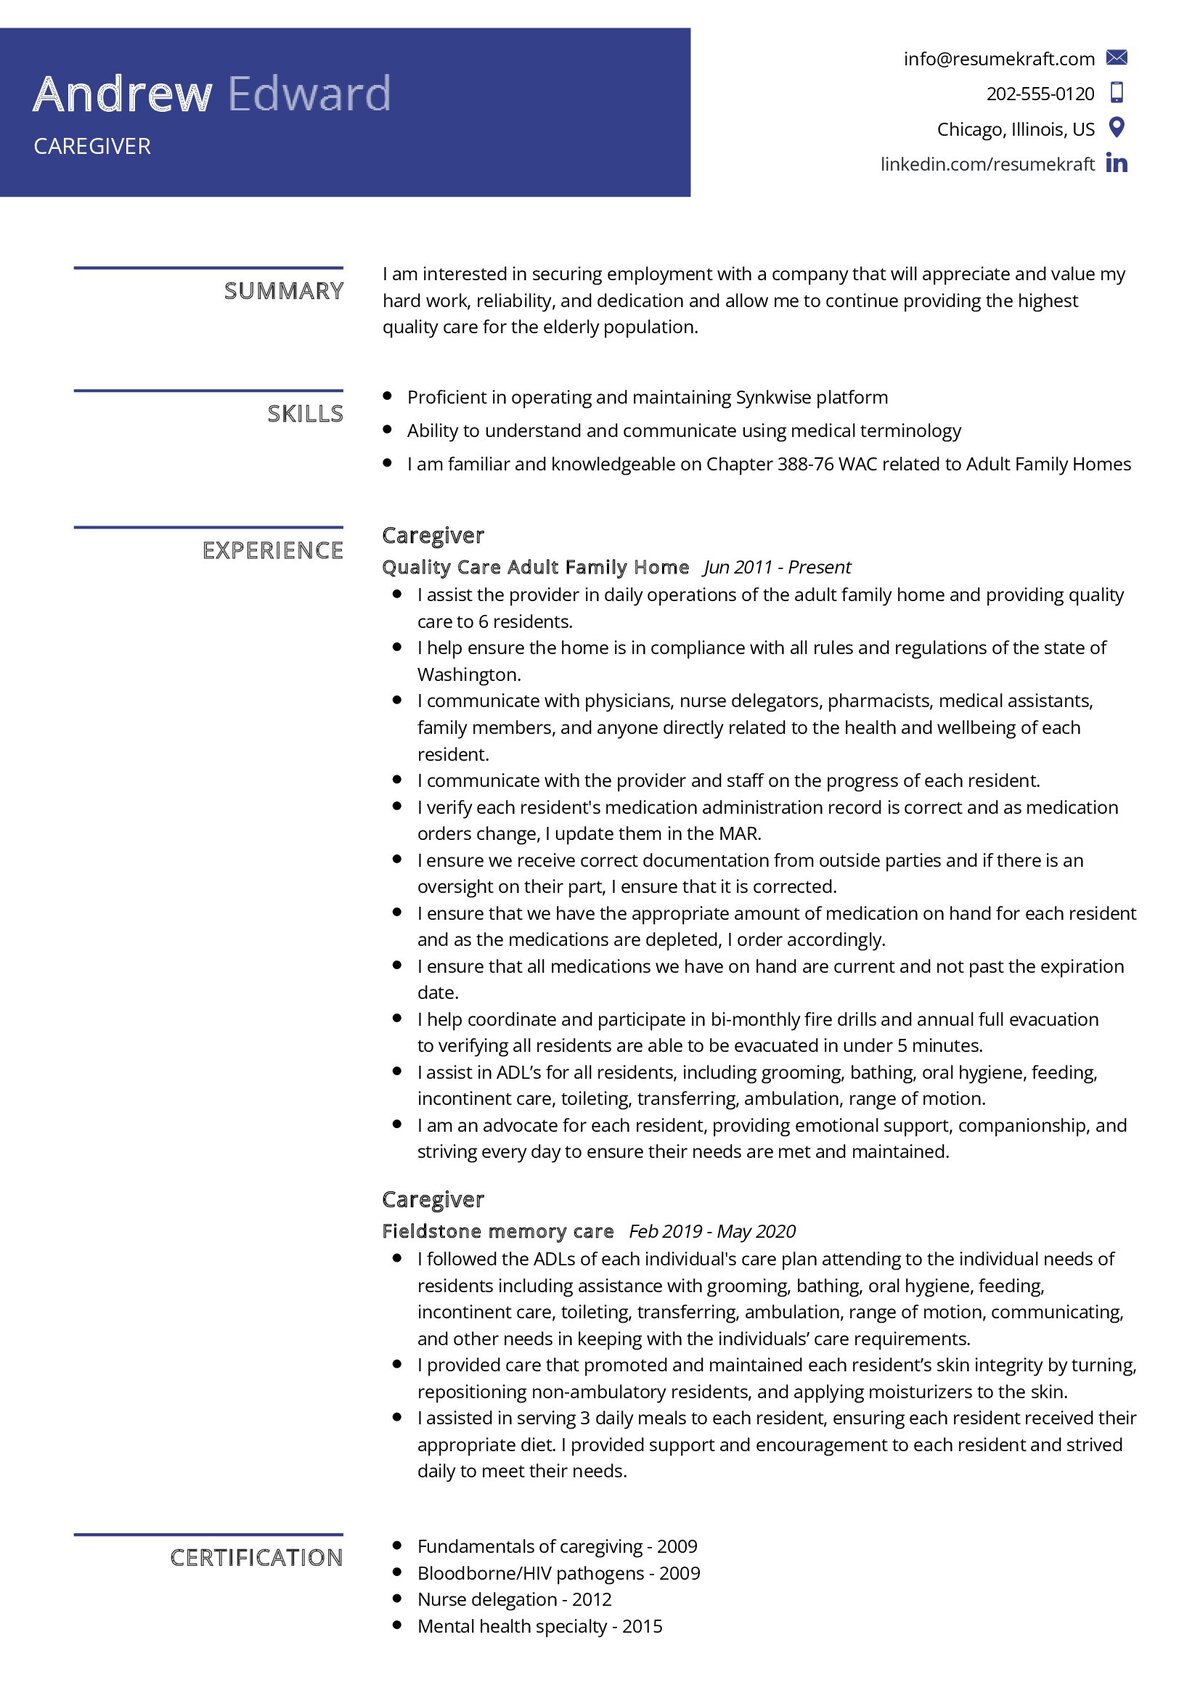 example of resume objective for caregiver